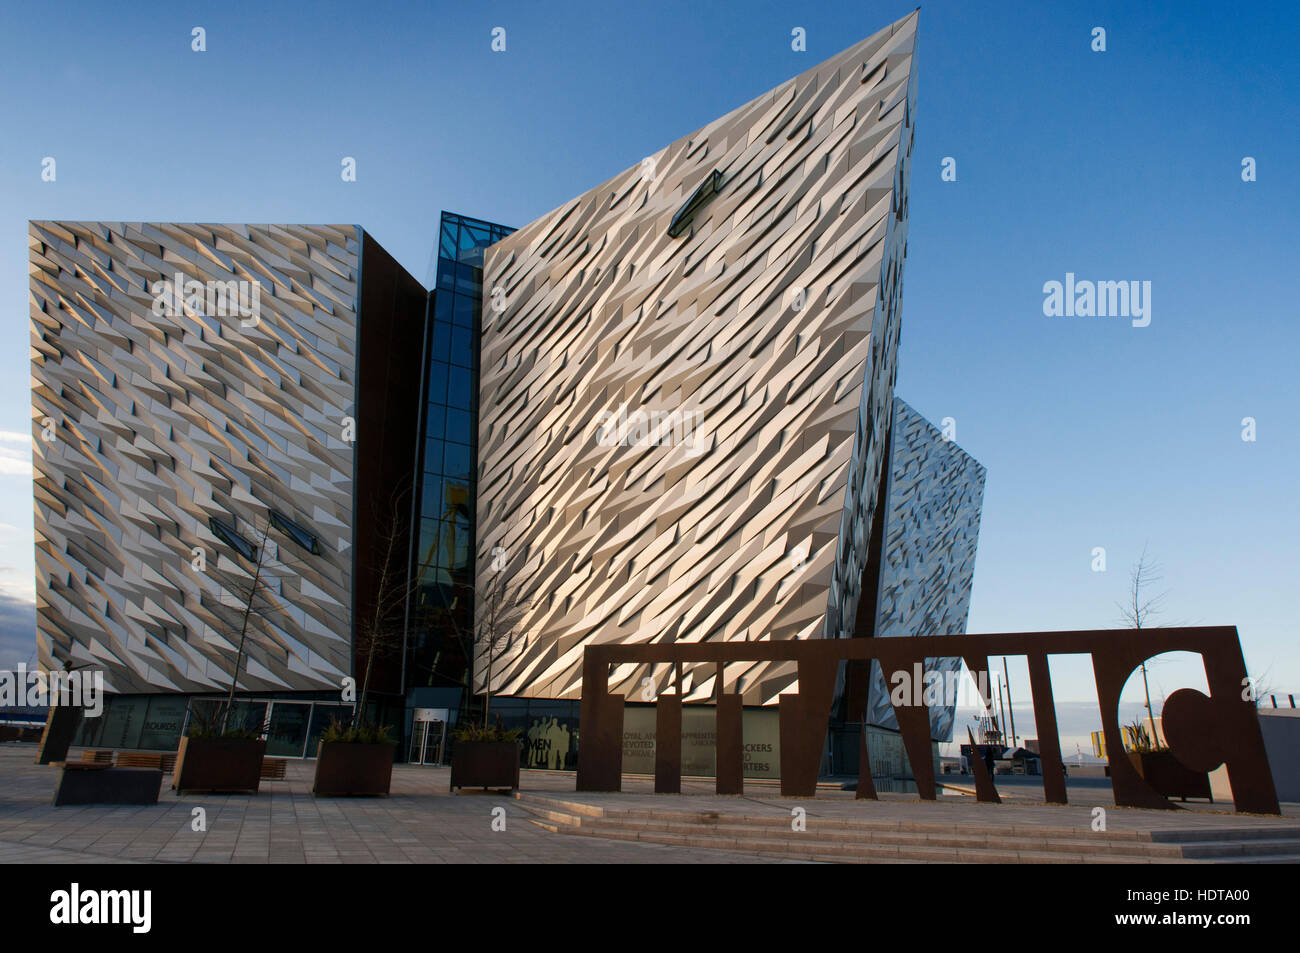 Titanic Belfast museum and Visitors Centre, Titanic Quarter, Belfast, Northern Ireland, UK. A giant steel name plate marks the entrance to the Titanic Stock Photo